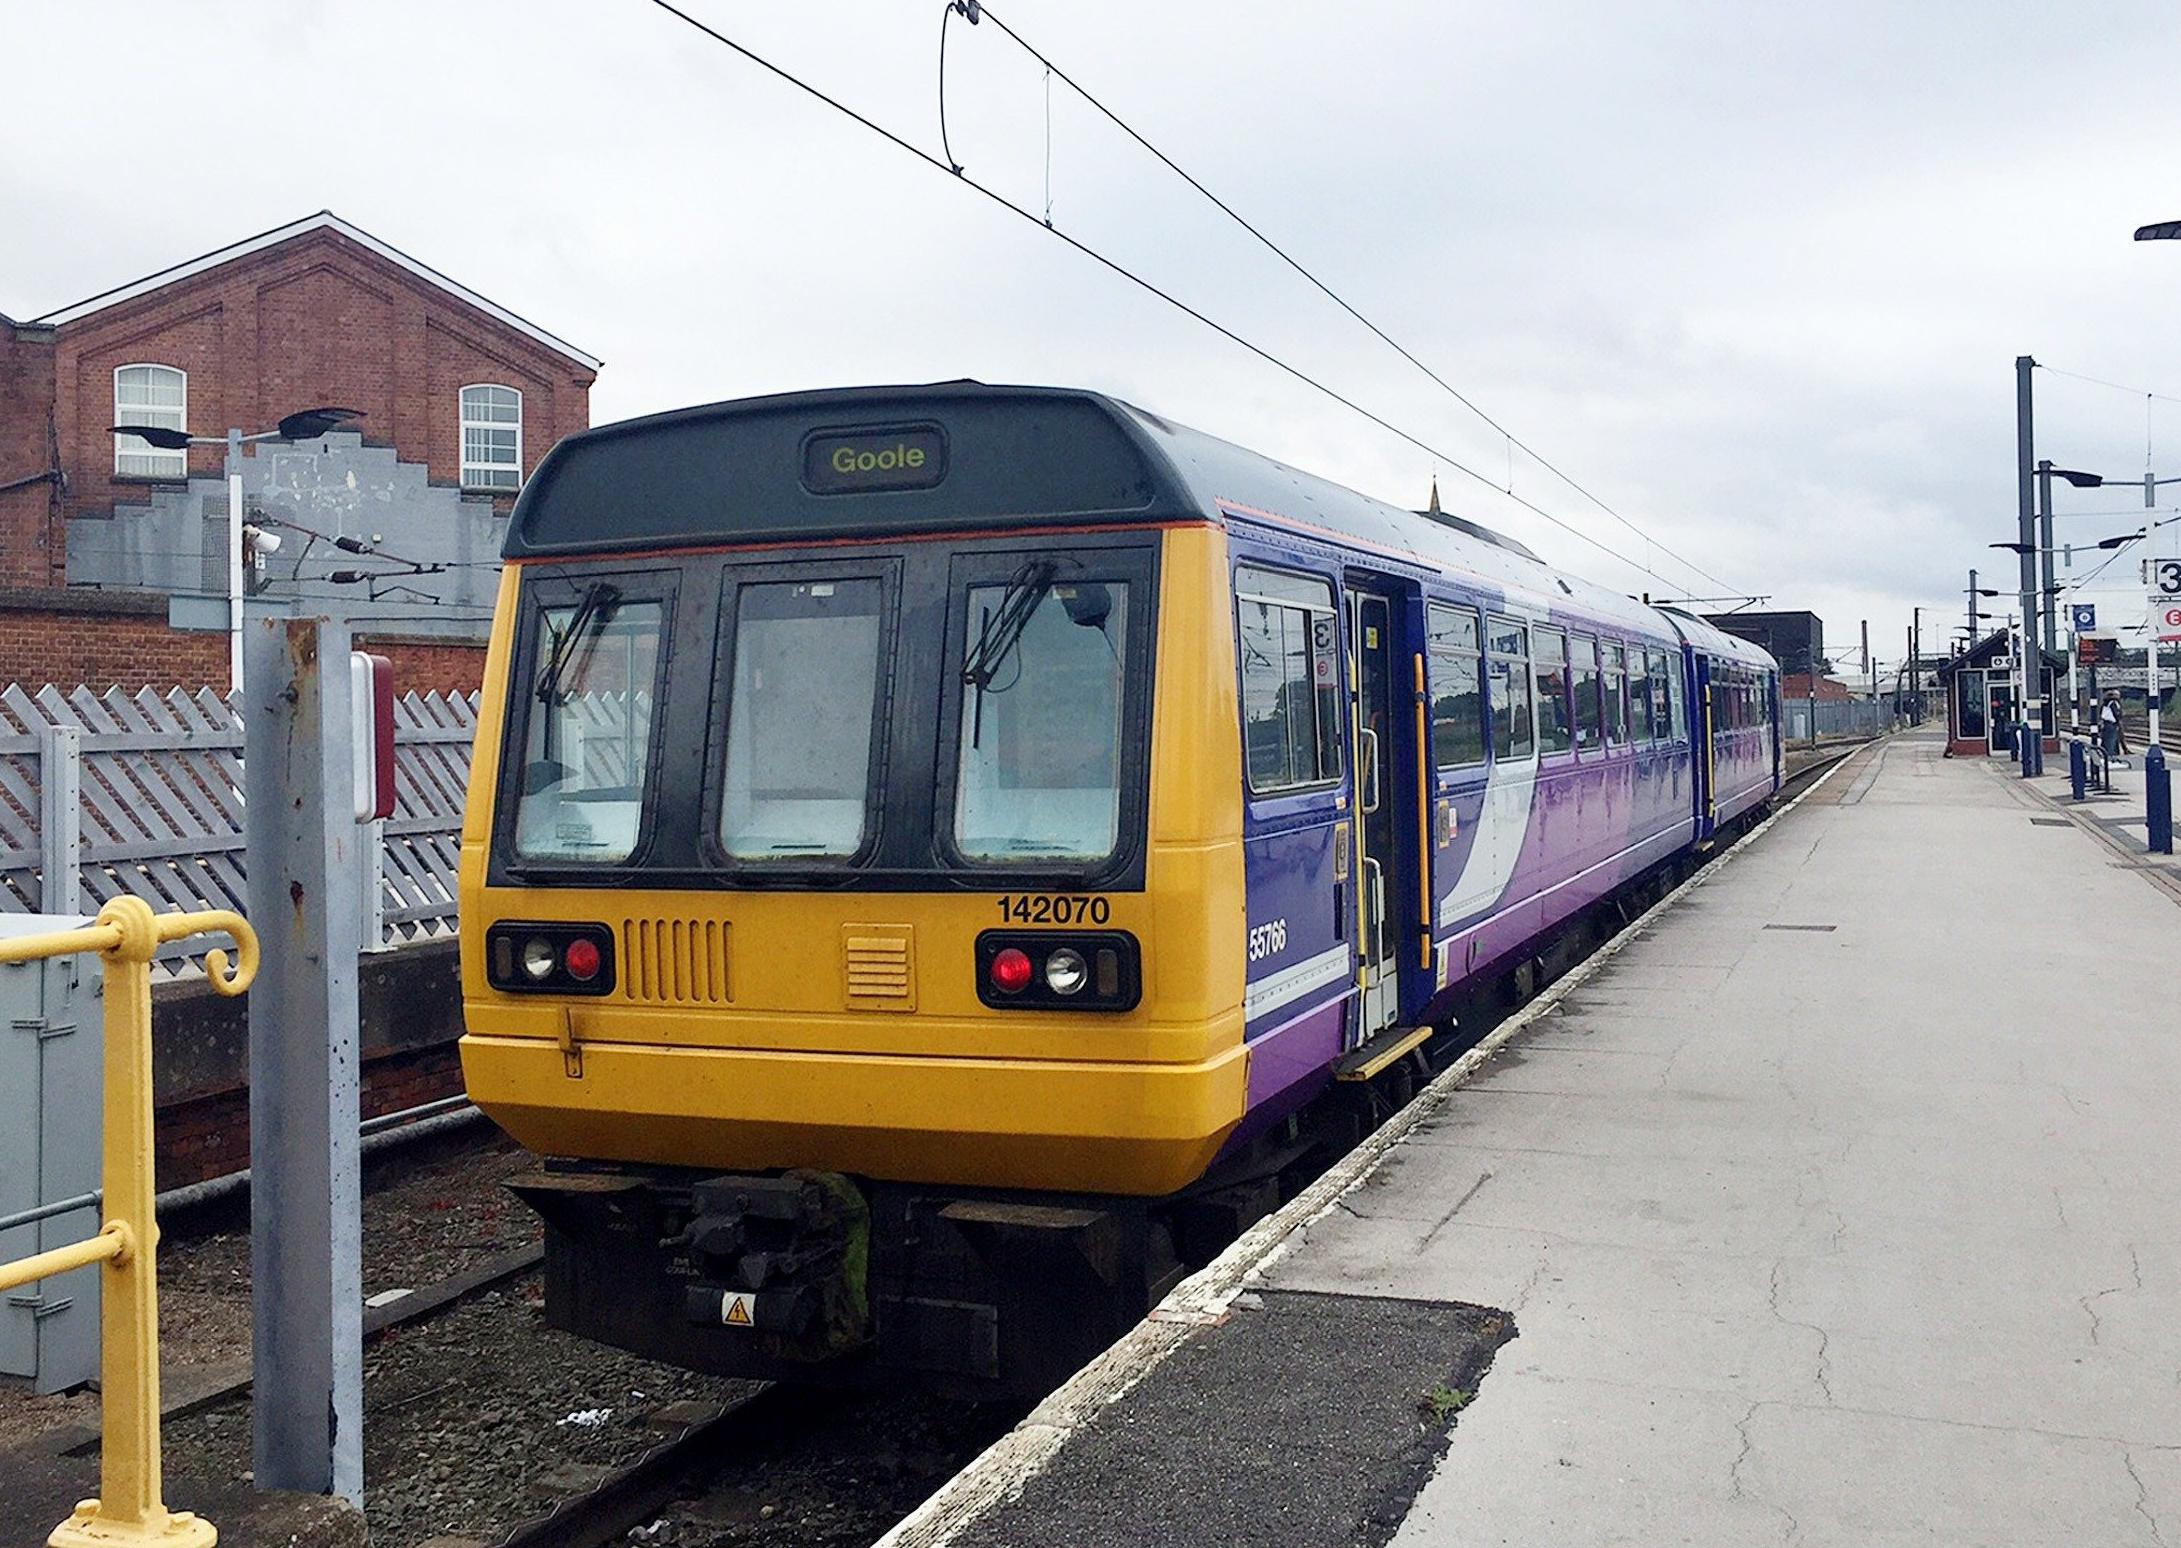 Outdated Pacer trains are the symbol of the North-South divide.